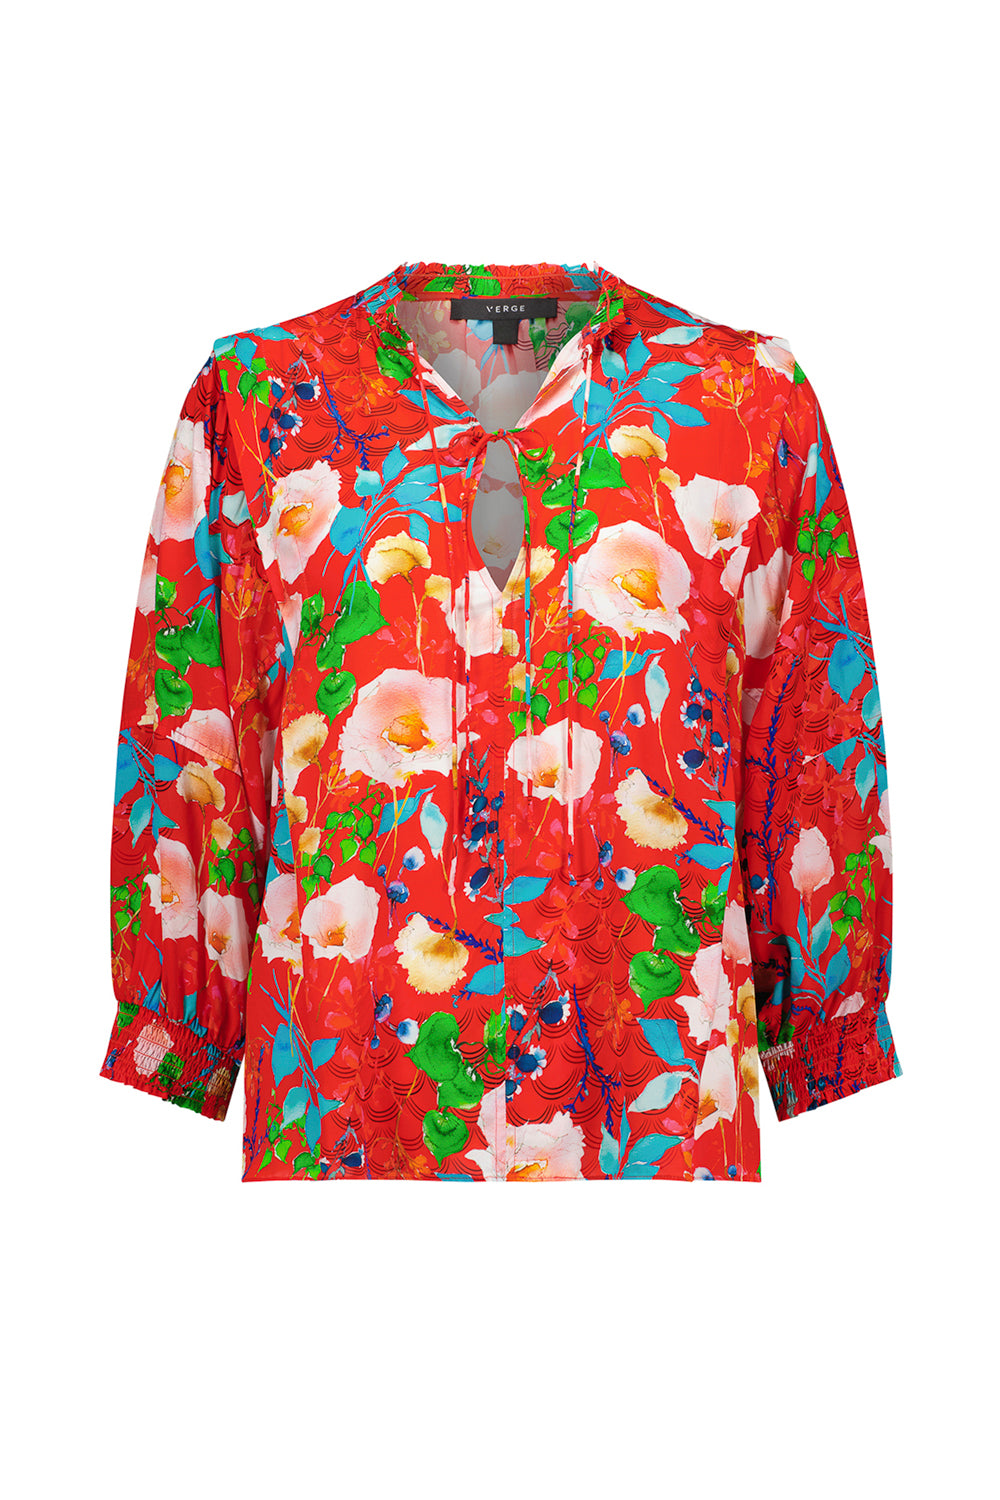 Aiko Blouse - Red Floral Print - Blouse VERGE